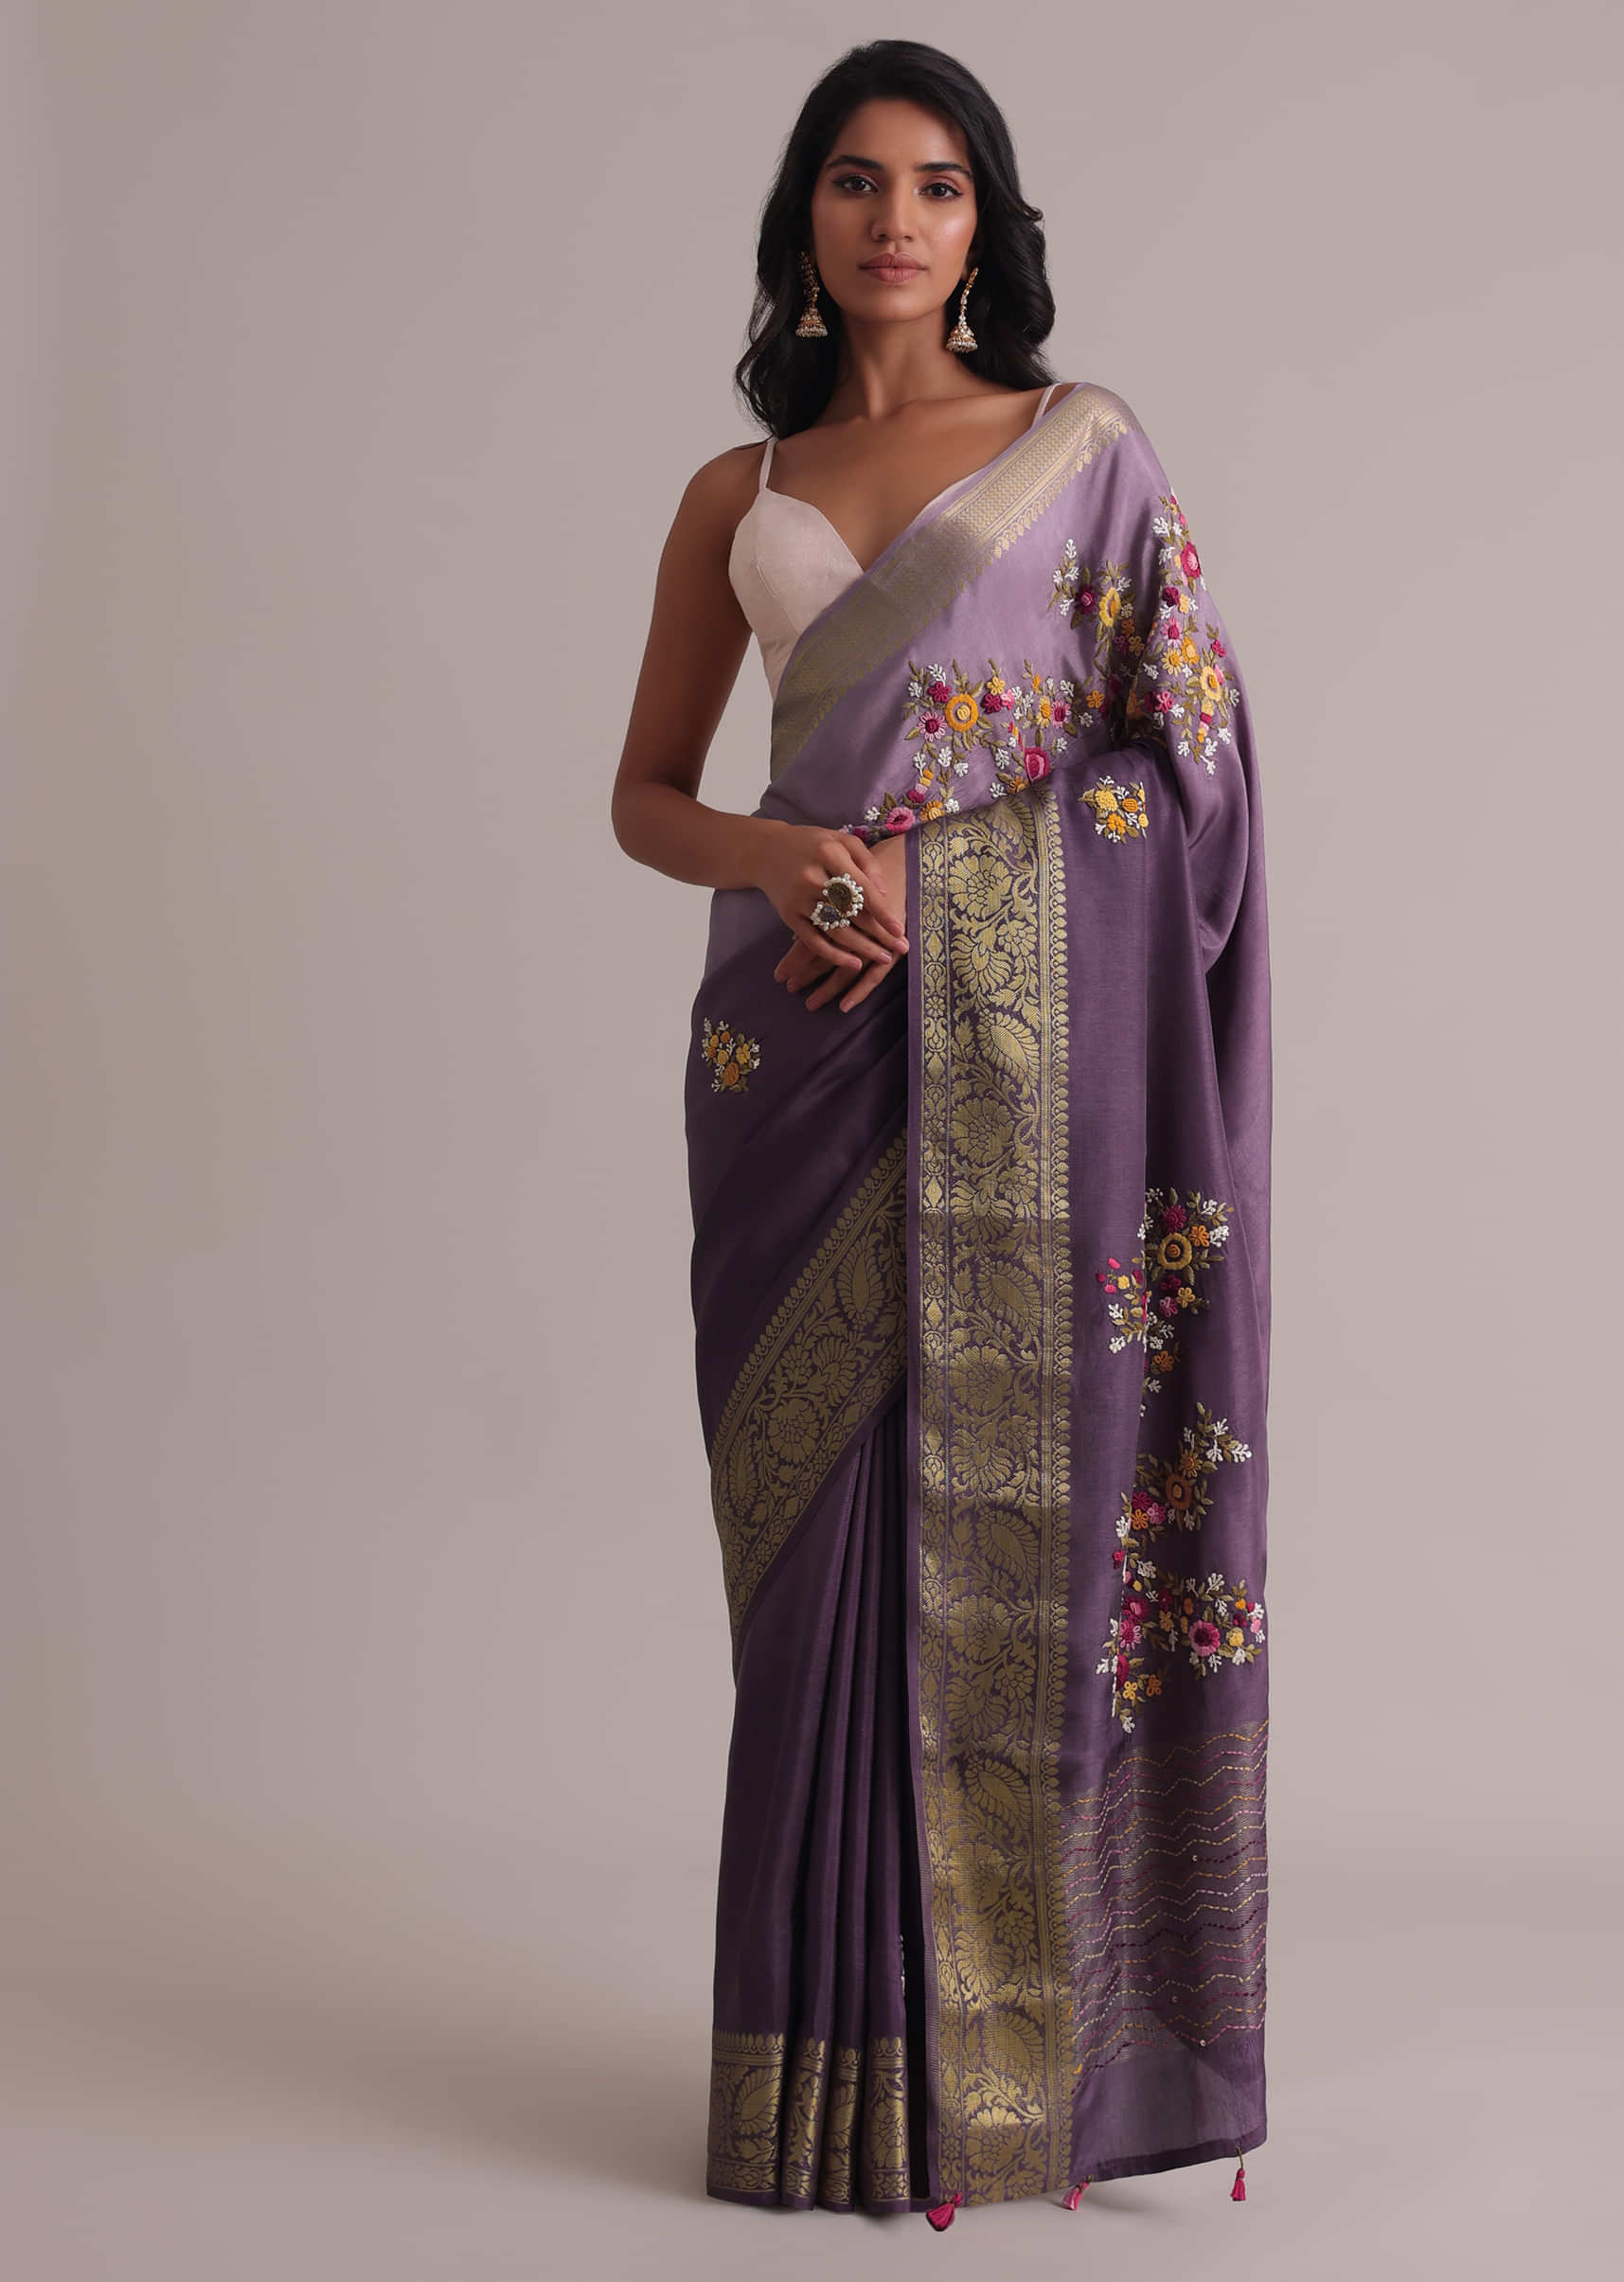 Purple Resham 3D Bud Embroidered Ombre Saree With Brocade And Thread Work In Dola Crepe